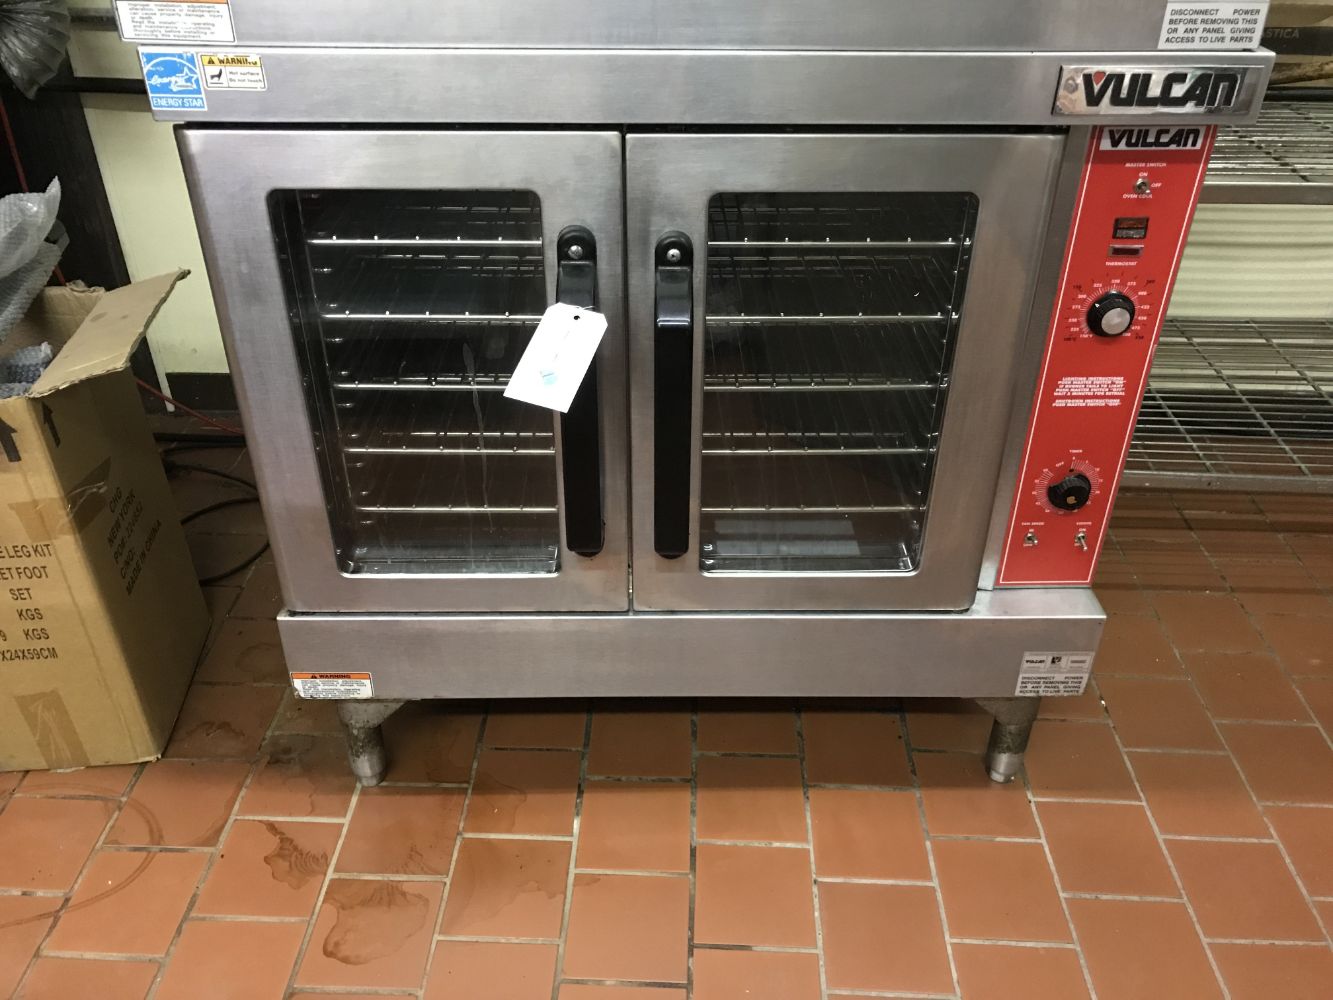 RESTAURANT & CATERING EQUIP. - (4) CONVECTION OVENS - (2) MIXERS - SMOKER - LIKE NEW WALK INS